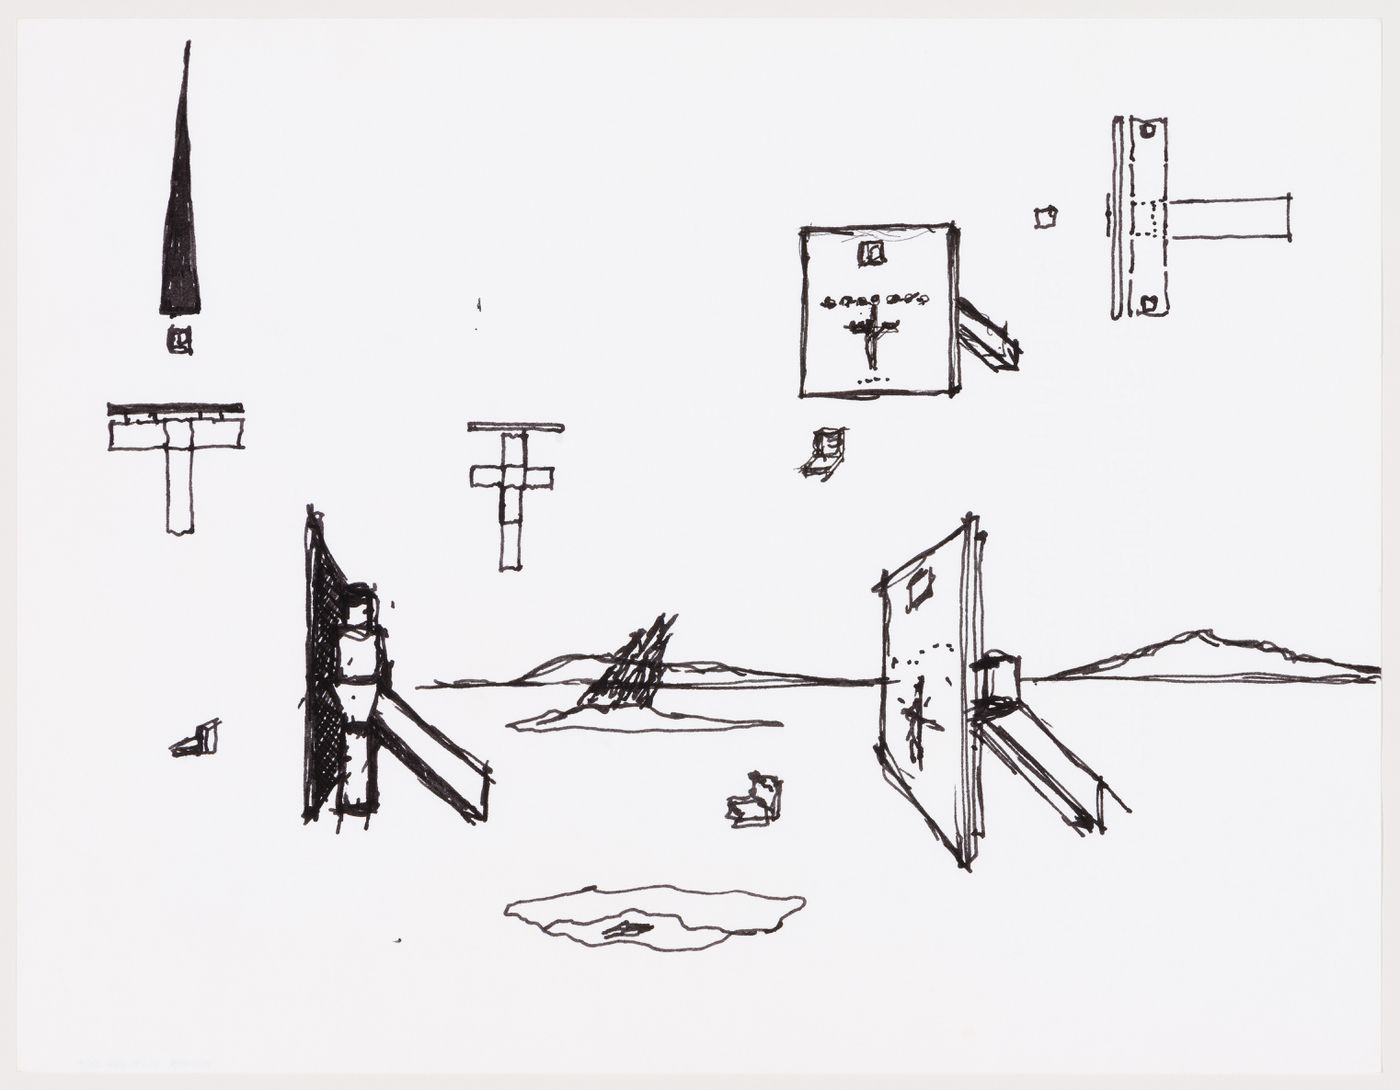 Soundings: Church Complex B: sketches for the chapel, stations of the cross, crucifix, bell tower, stone pew, ascending angels and fallen angel